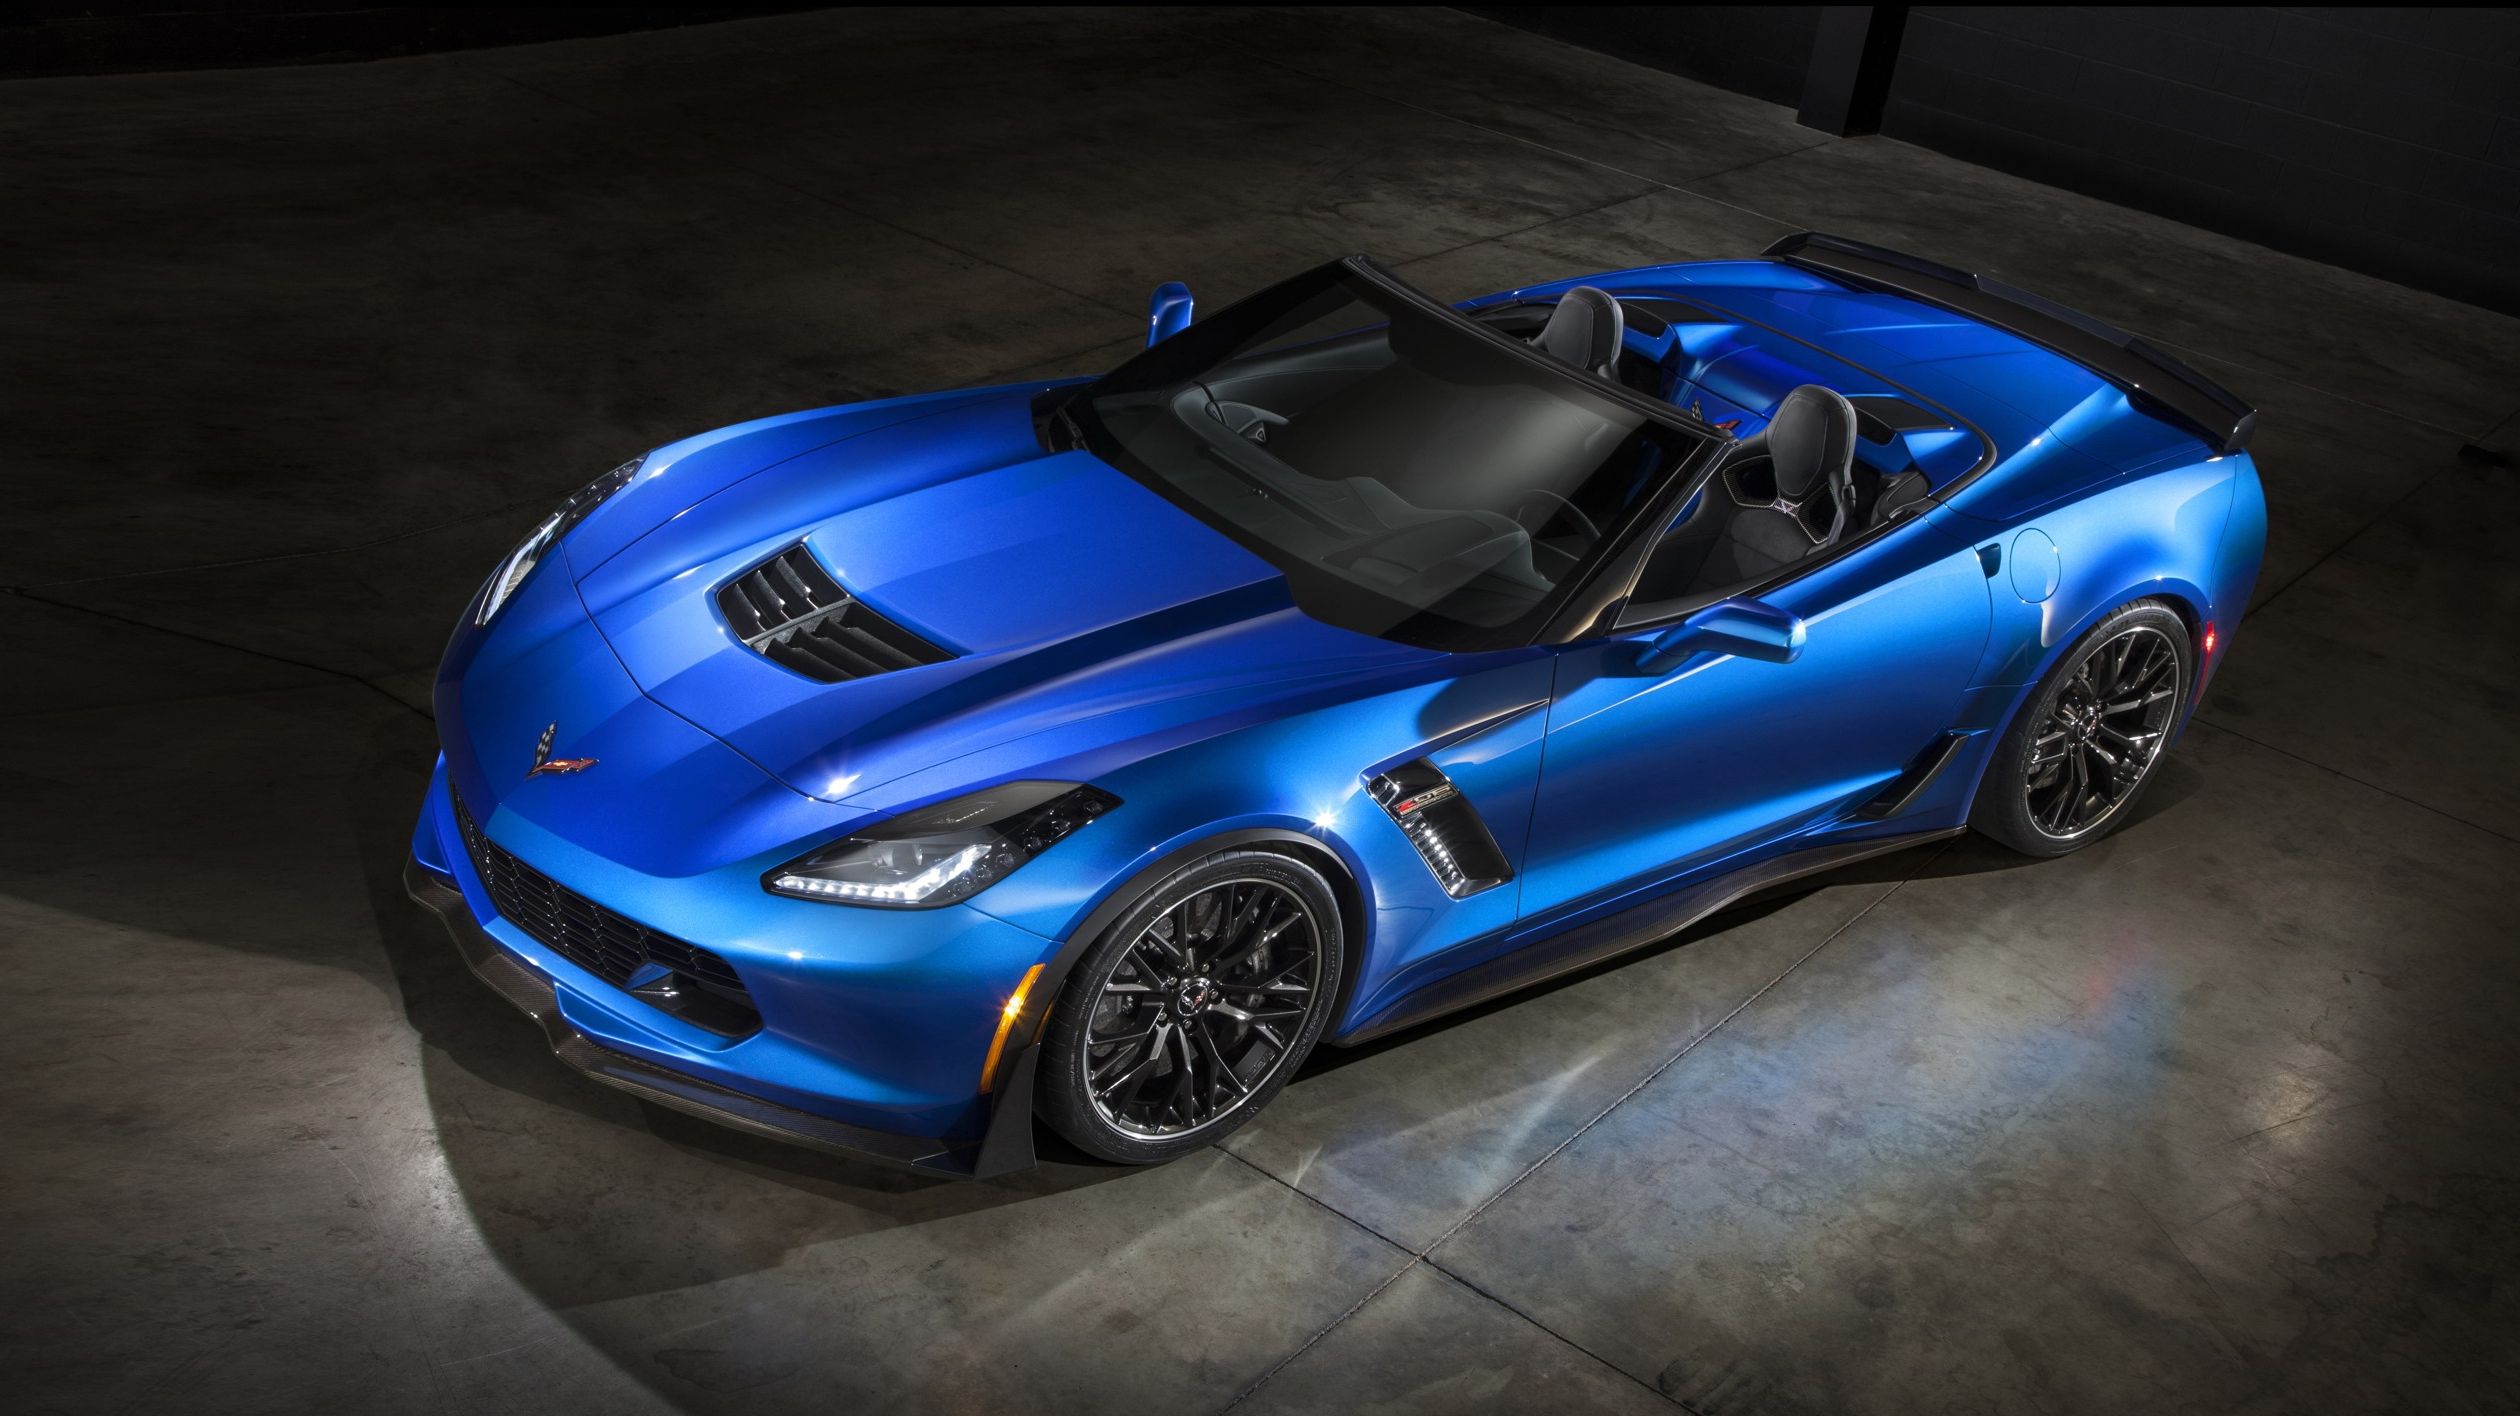  Can't afford the Z06? Chevy may have the answer in the near future, as it showed off a Stingray with a handful of Z06 bits added to it. 